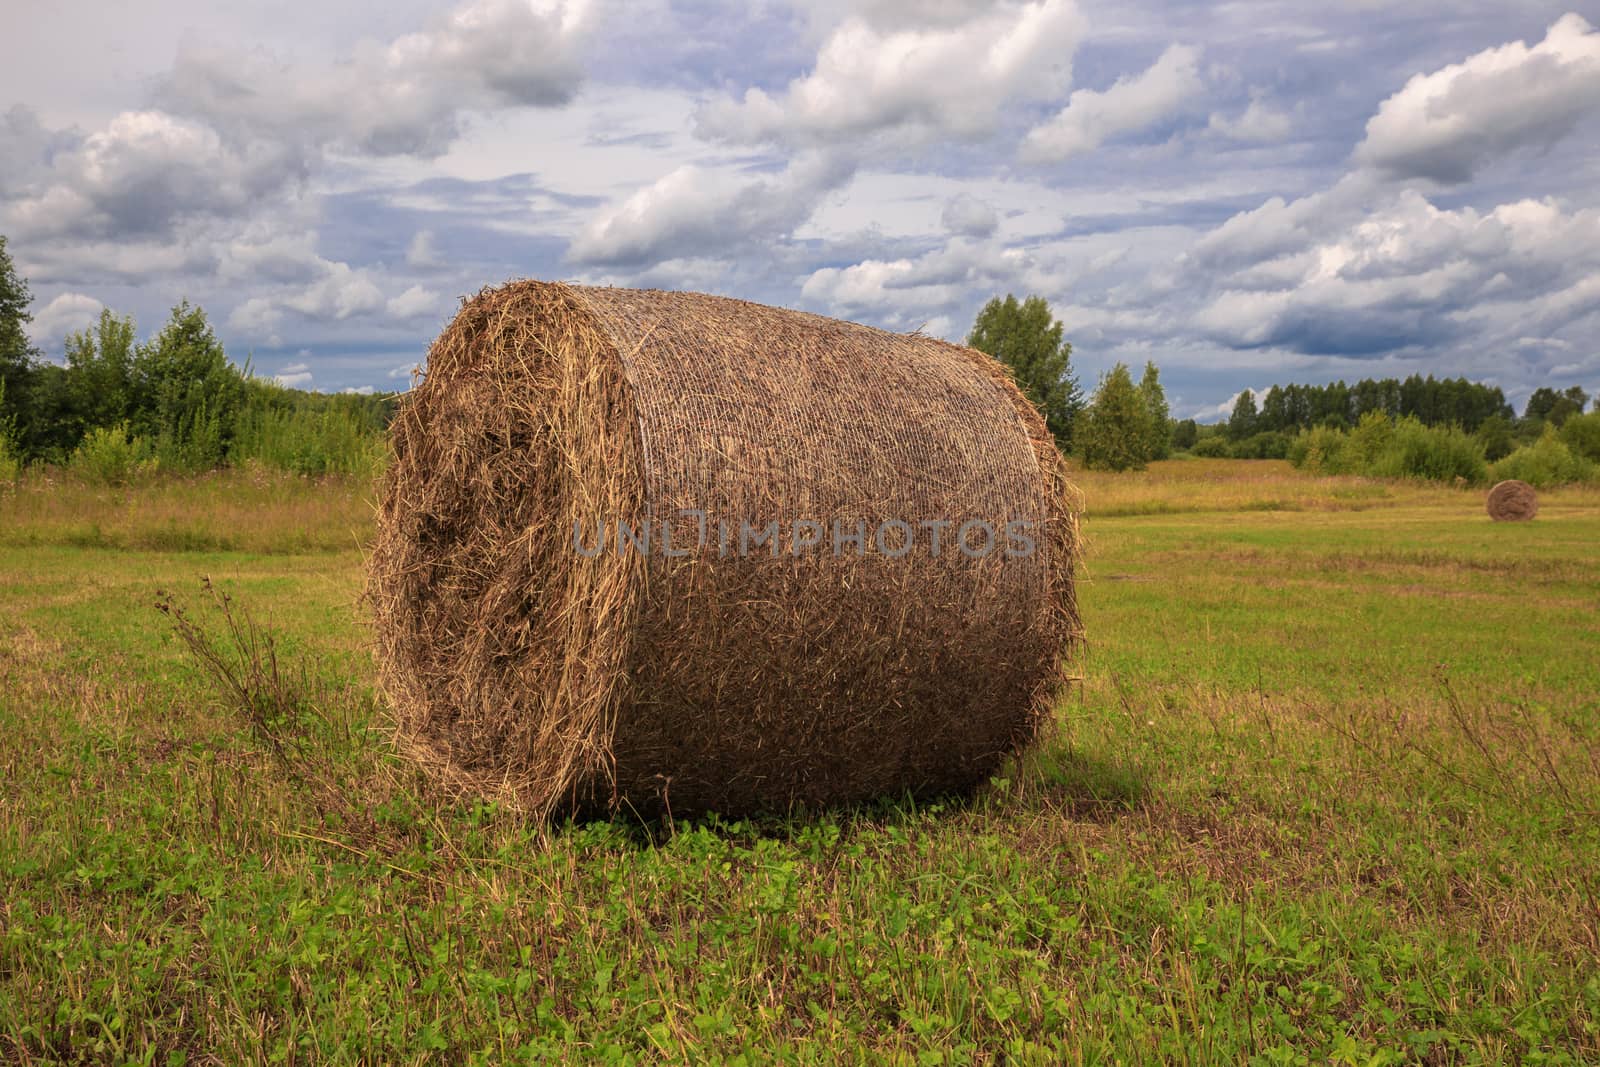 the bale of hay lying on the field against the sky